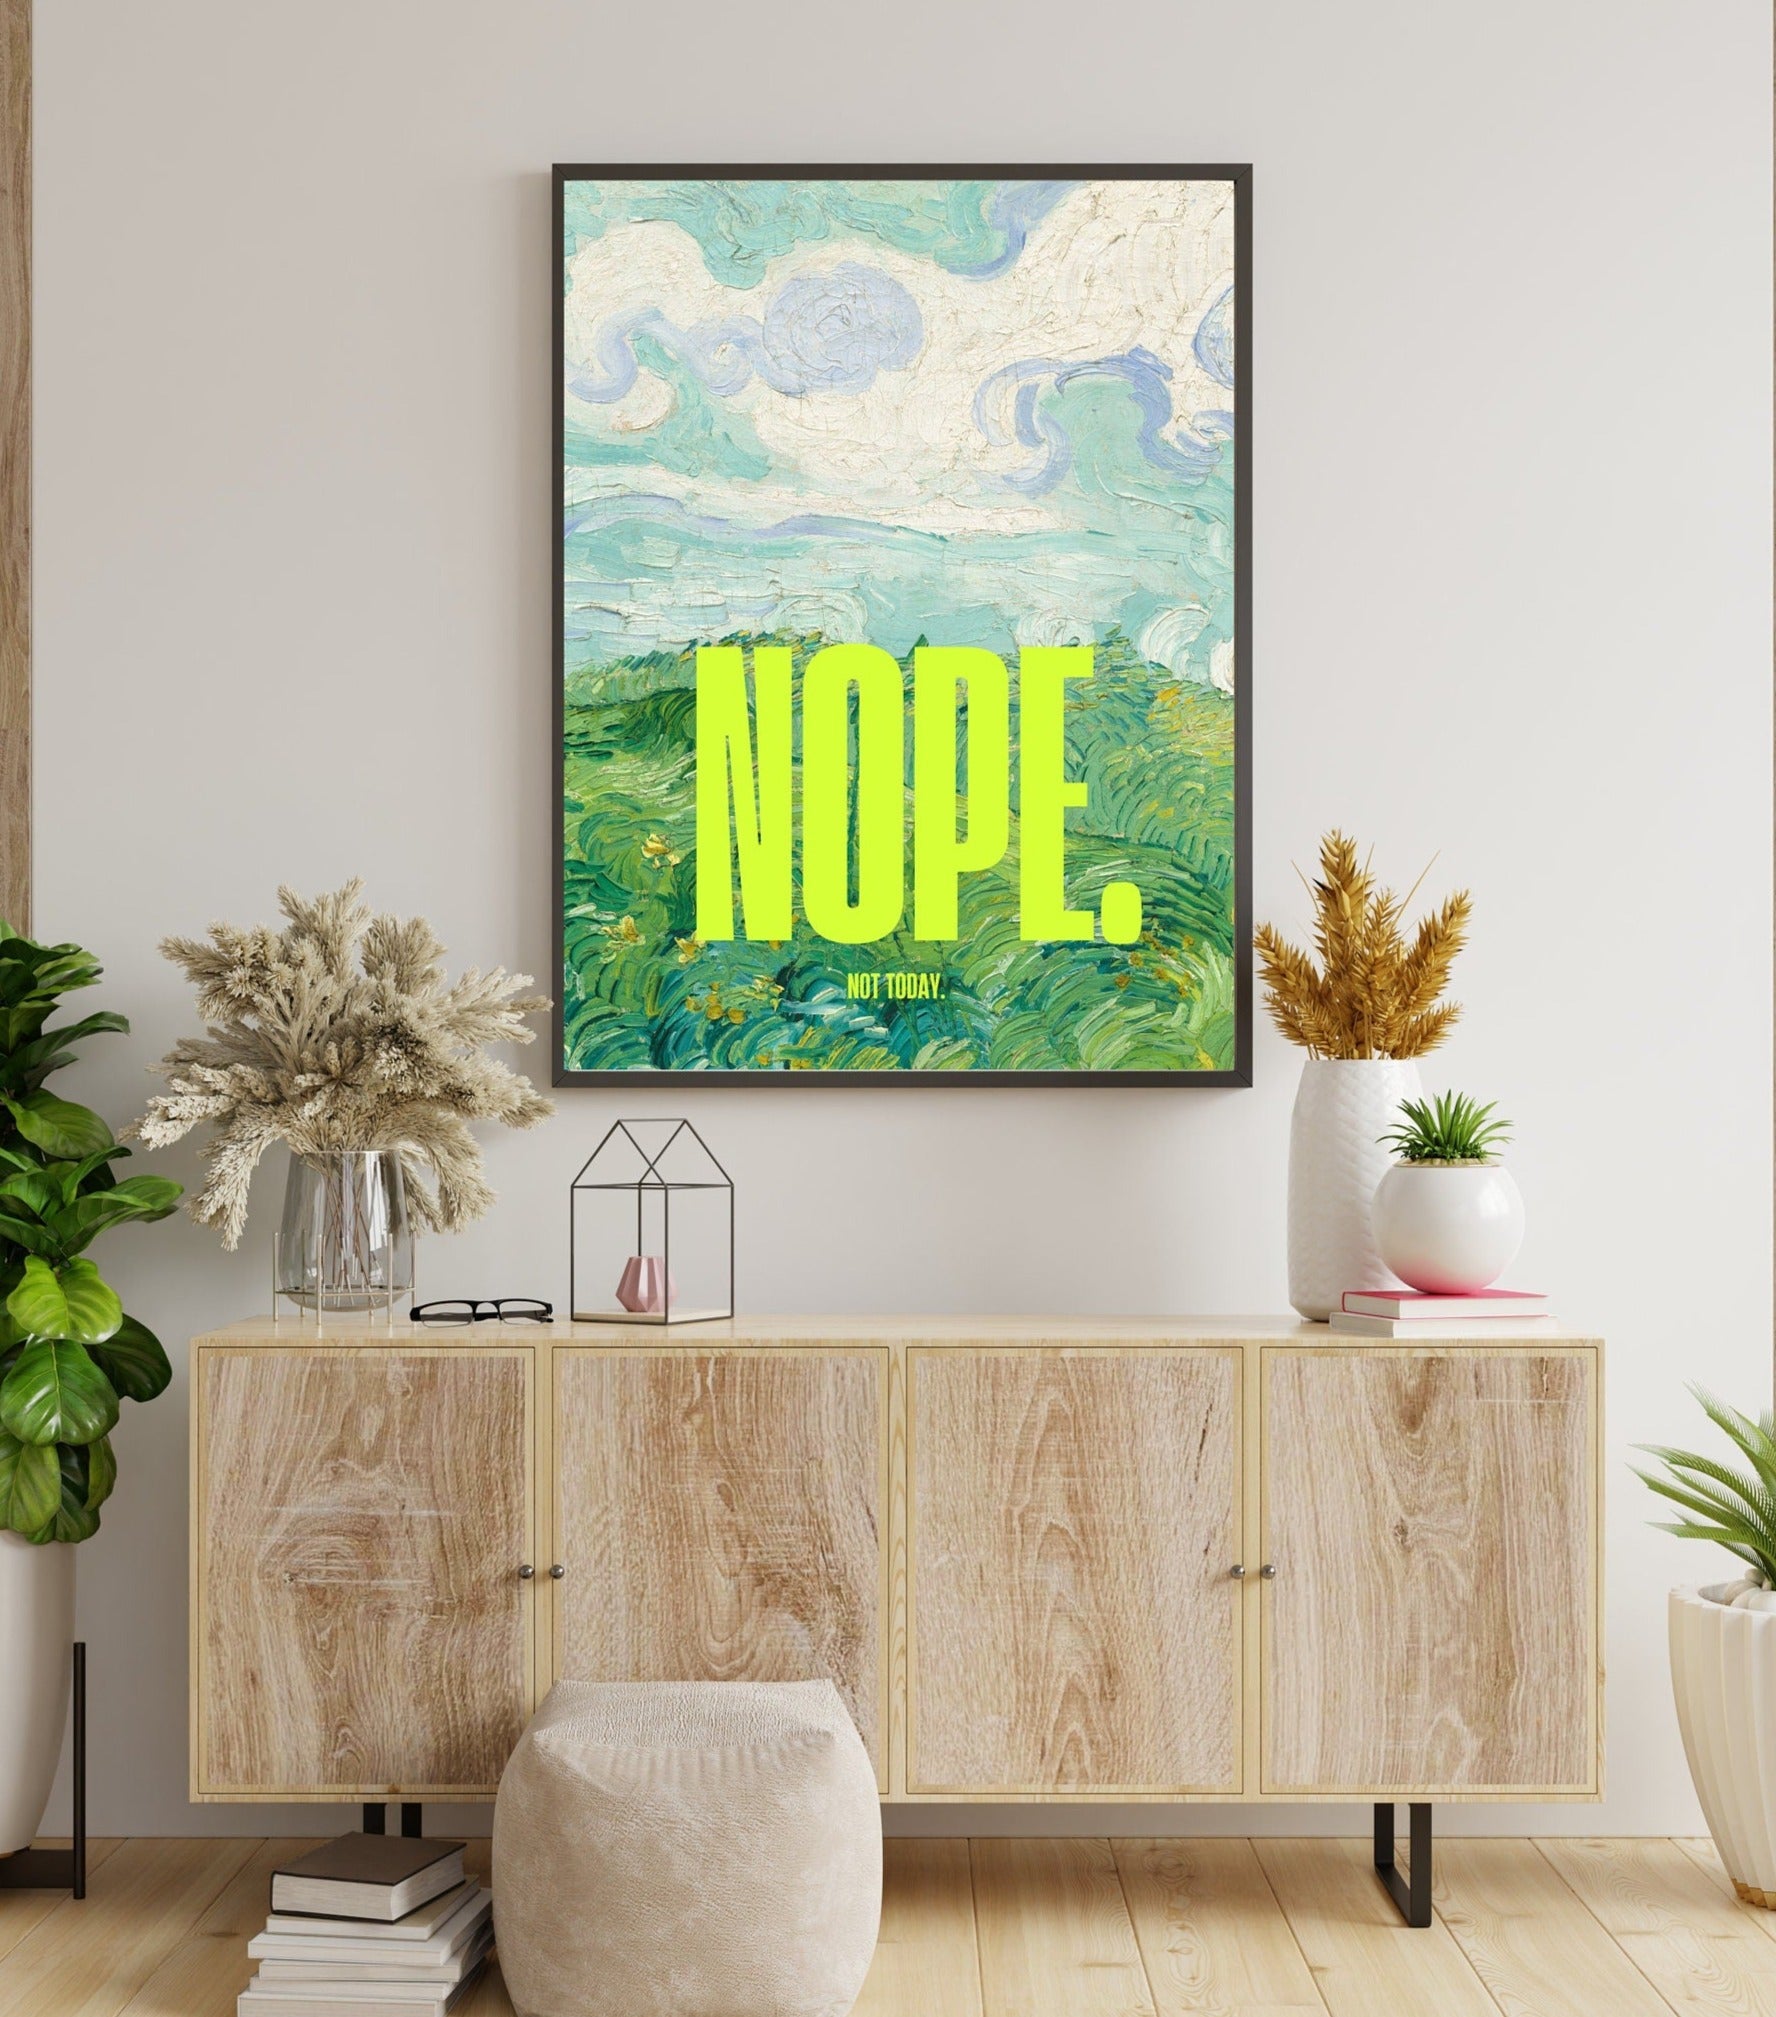 The Story Behind 'Nope Not Today' Altered Digital Prints